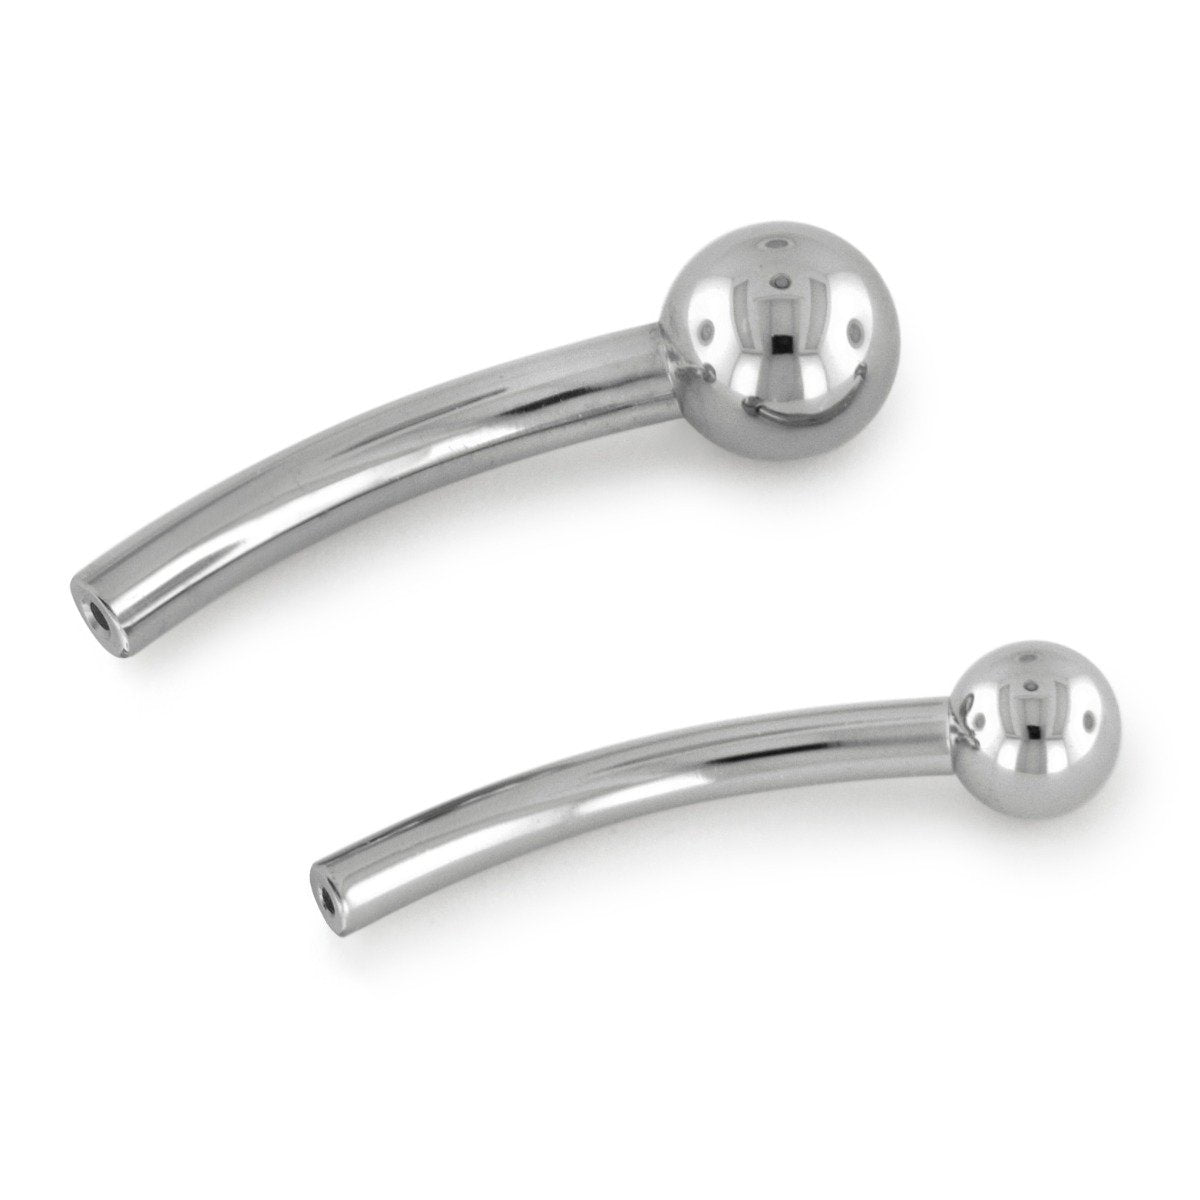 A pair of threadless titanium curved barbells, Shaft only.